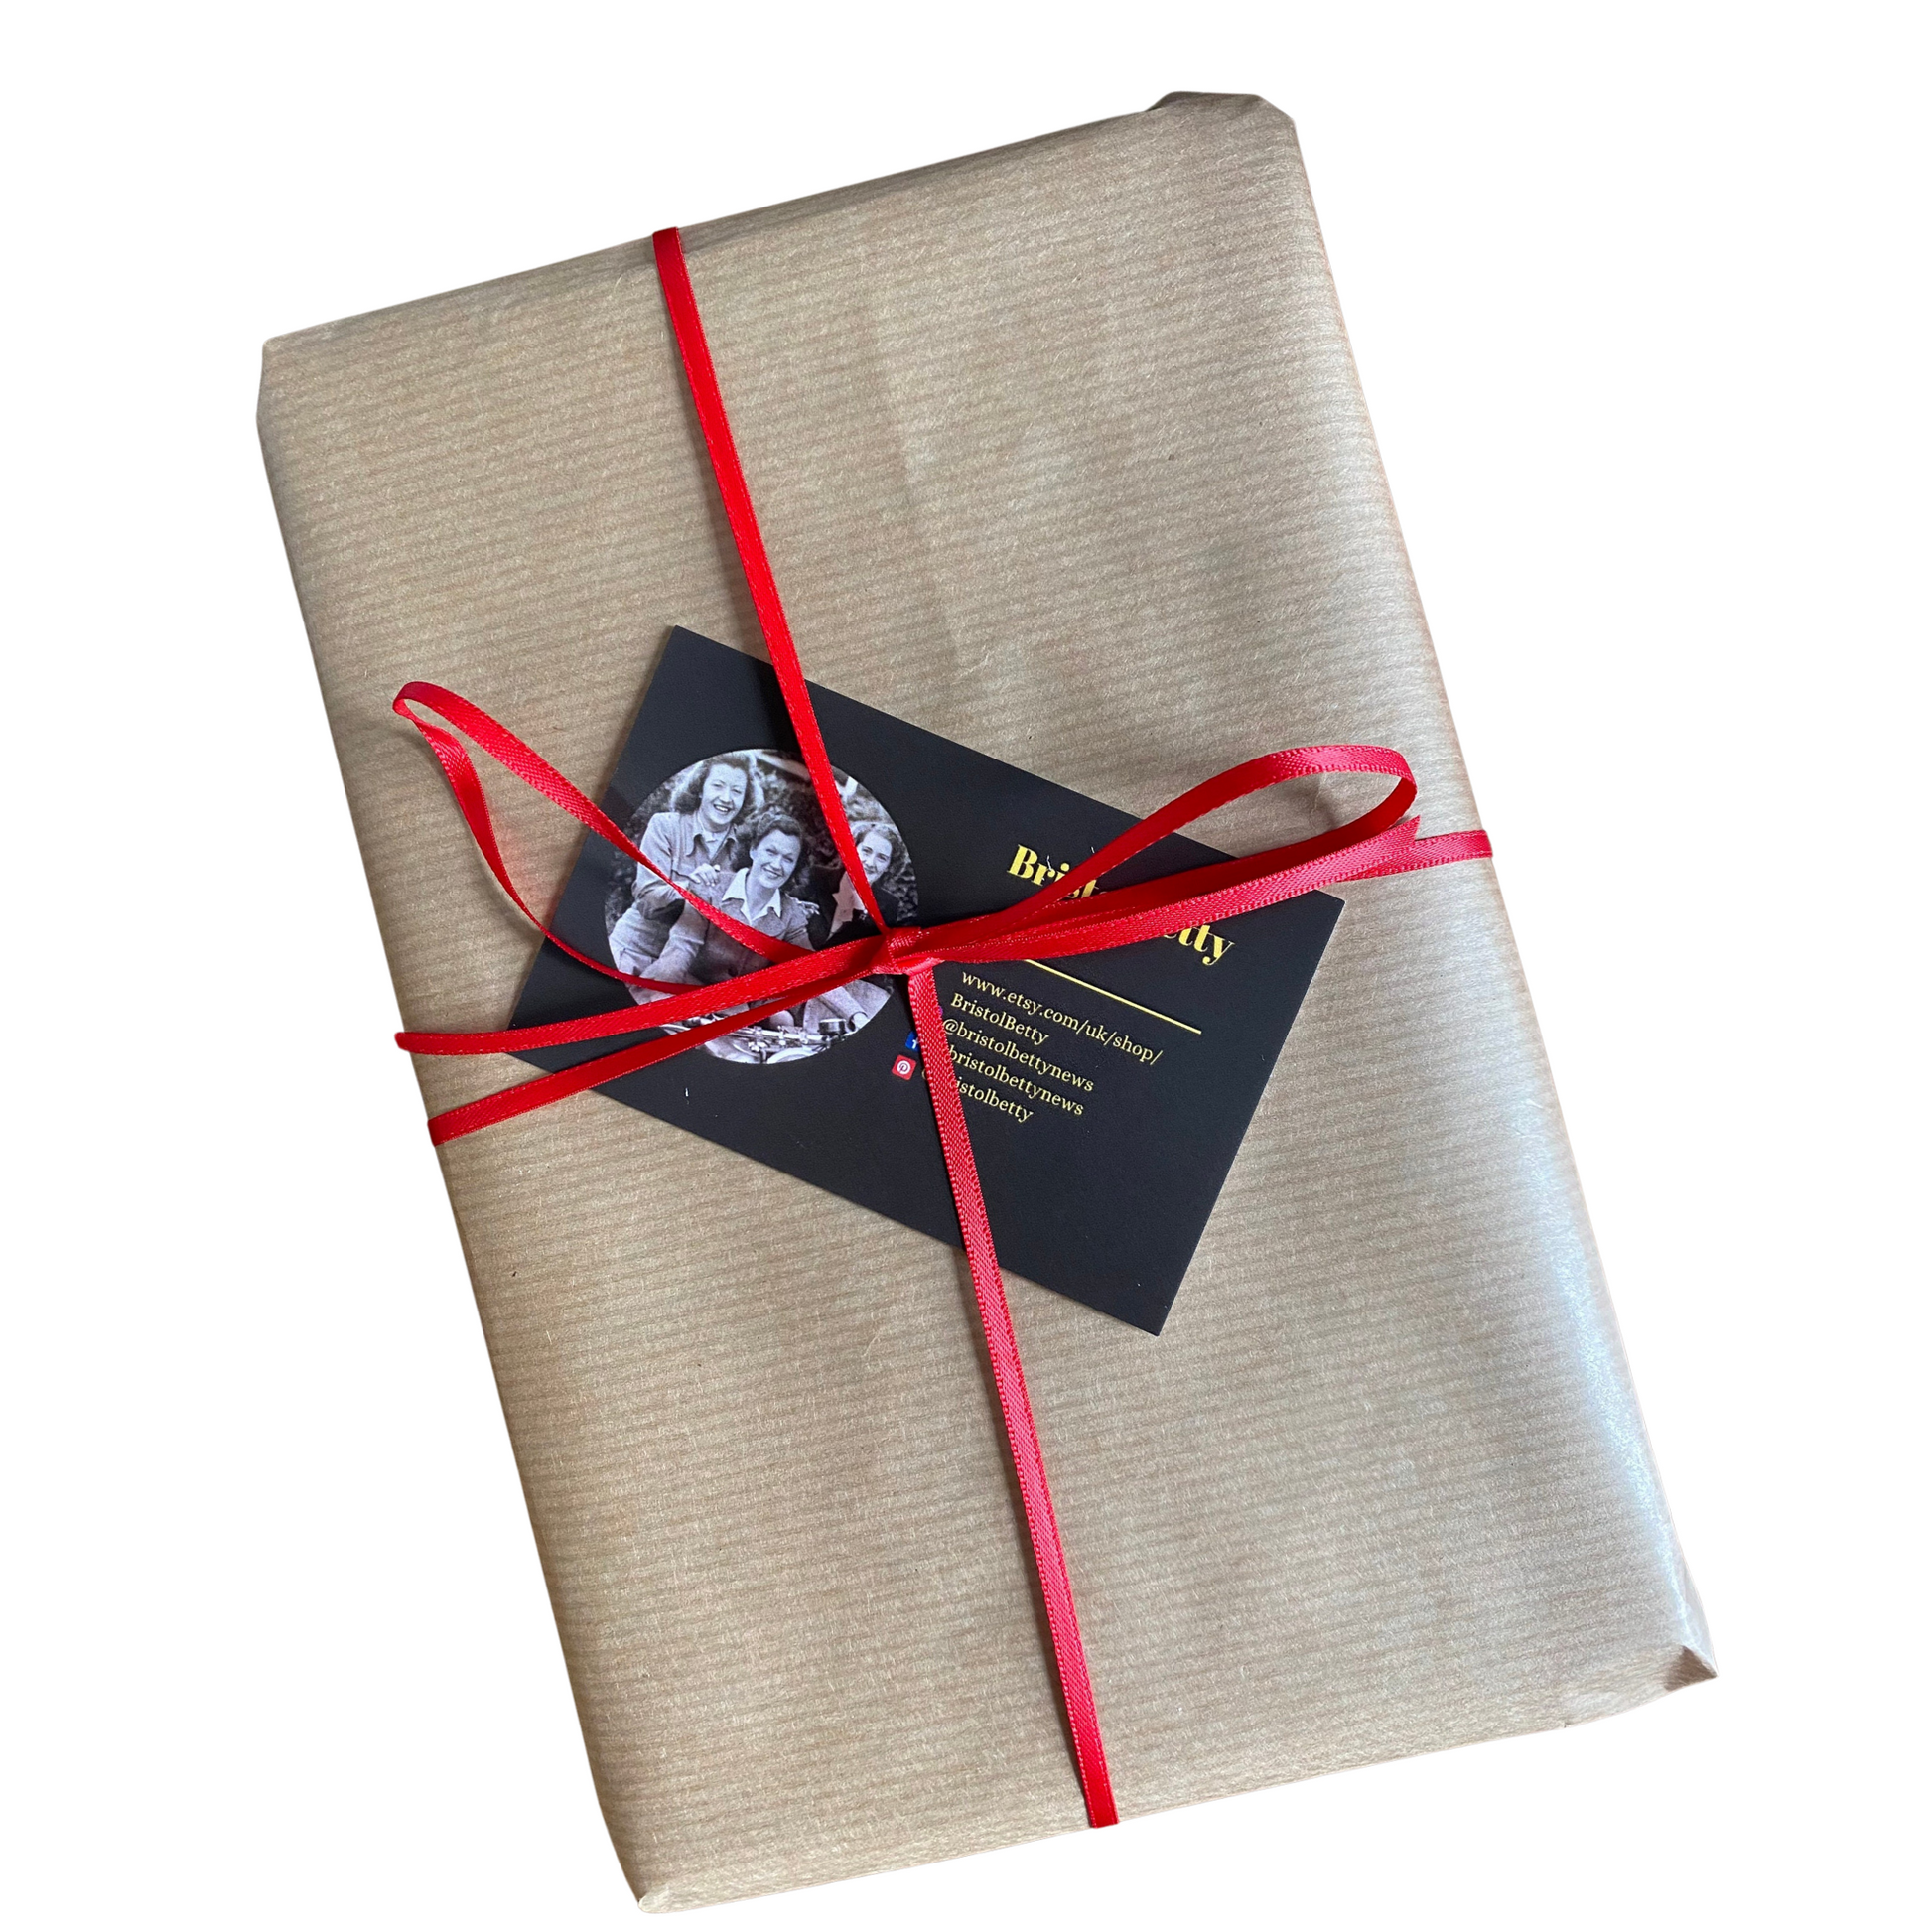 All vintage books are wrapped in Kraft paper and ribbon 